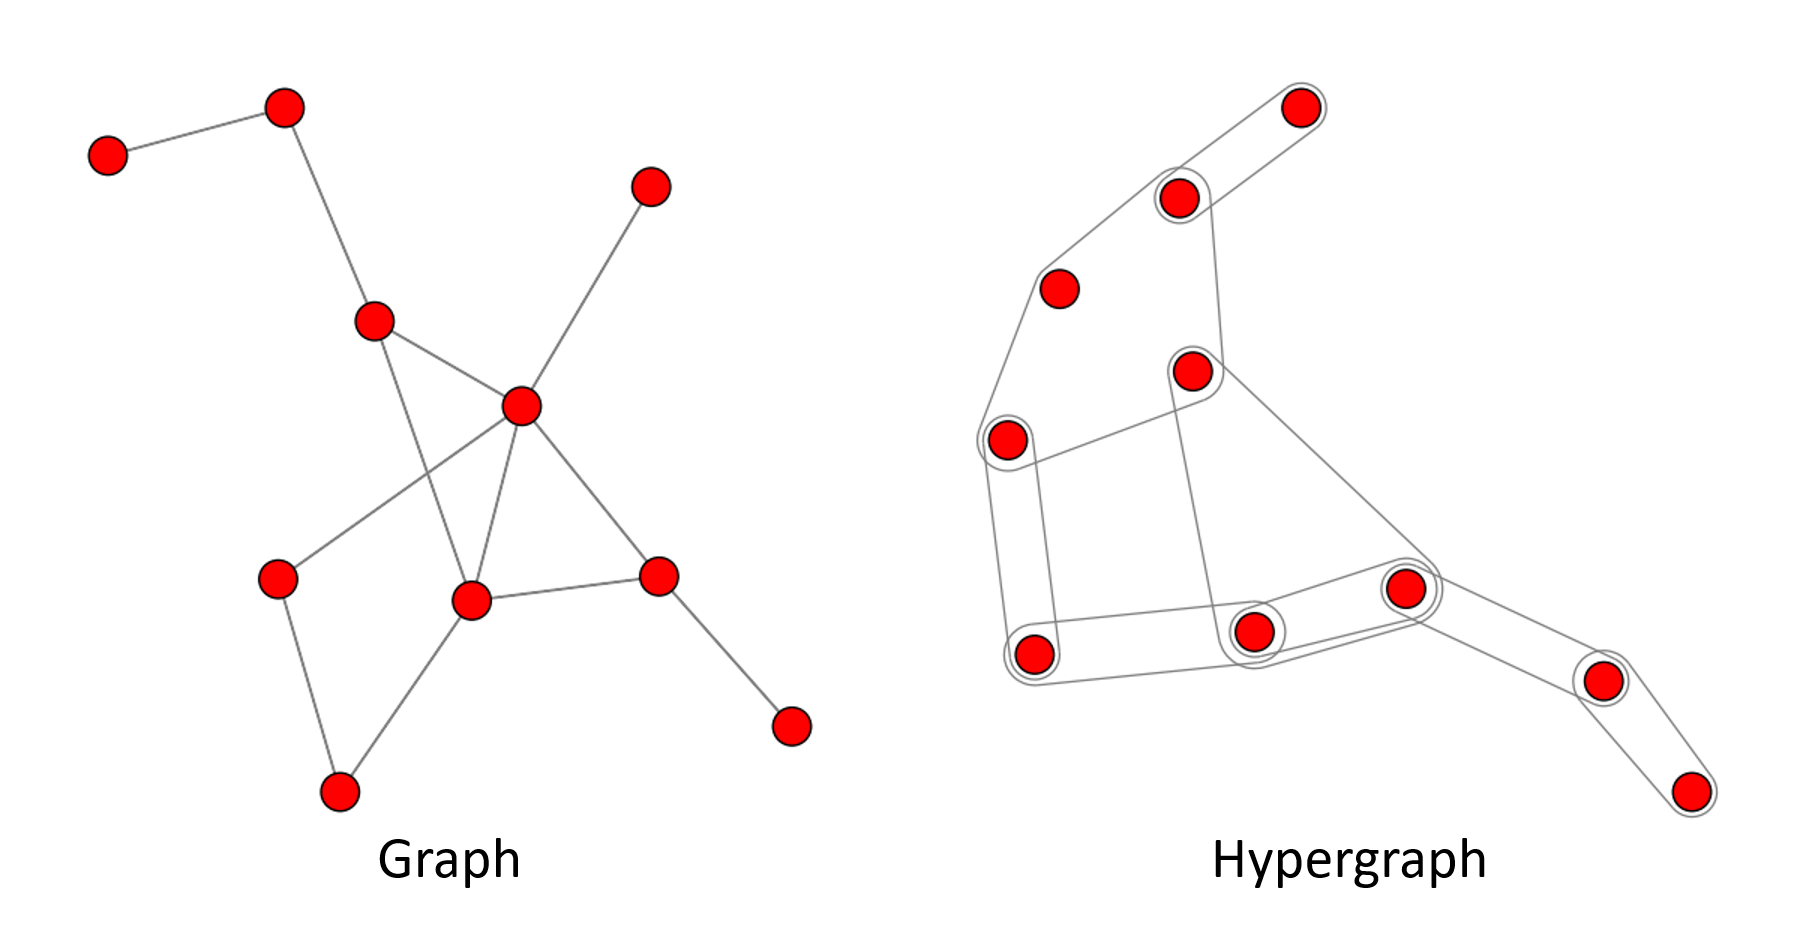 Visualization of graph and hypergraph